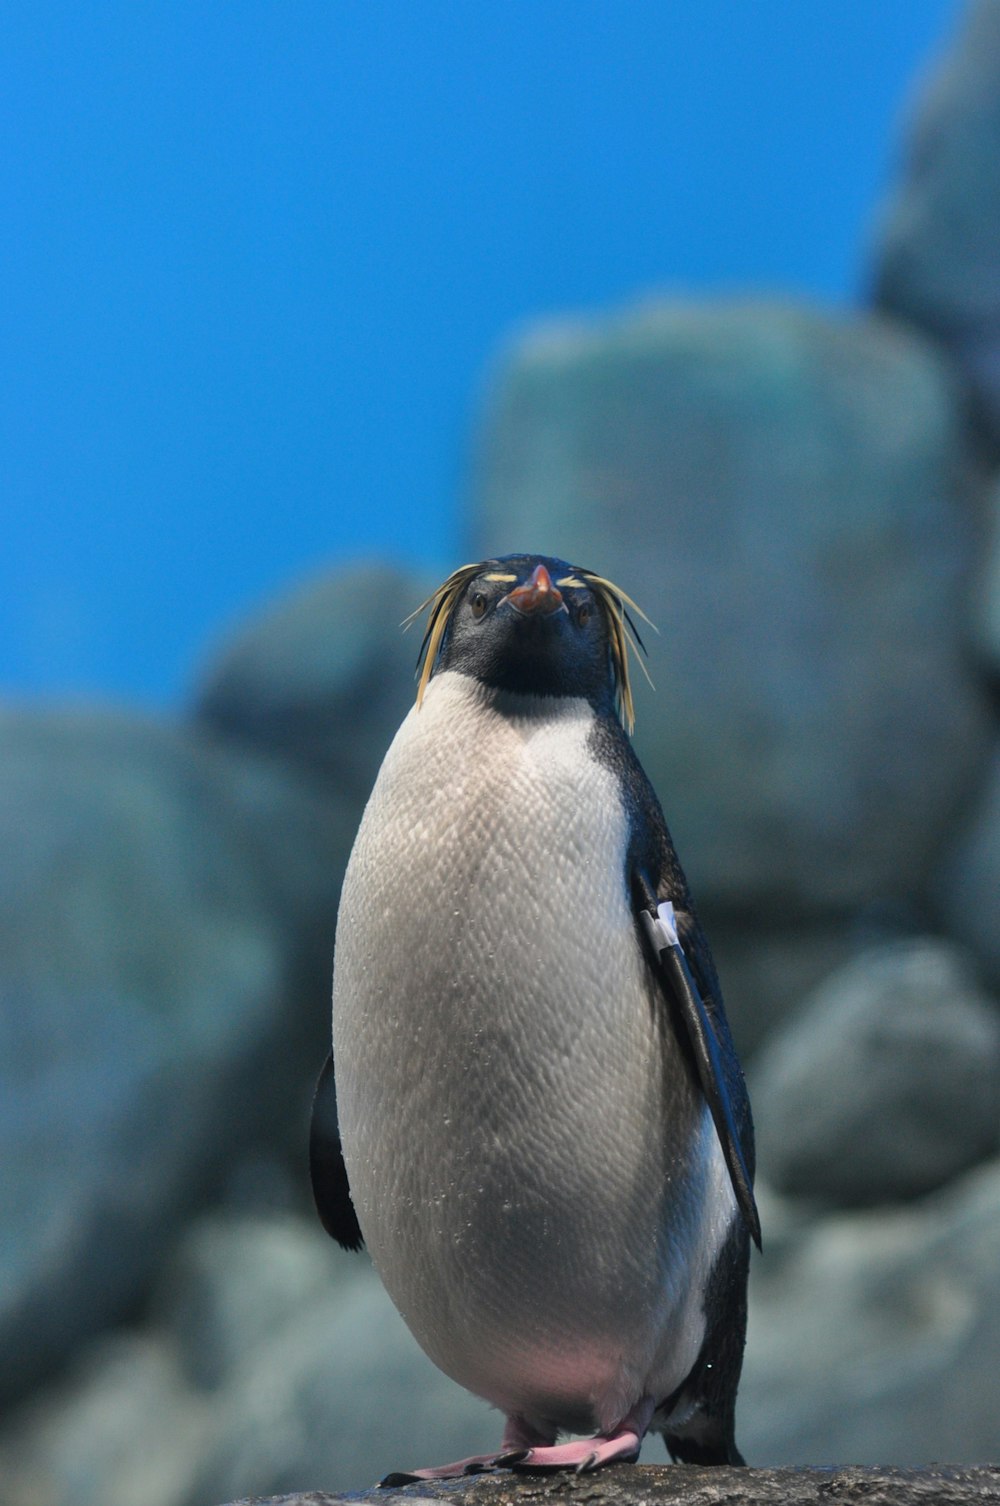 penguin in close up photography